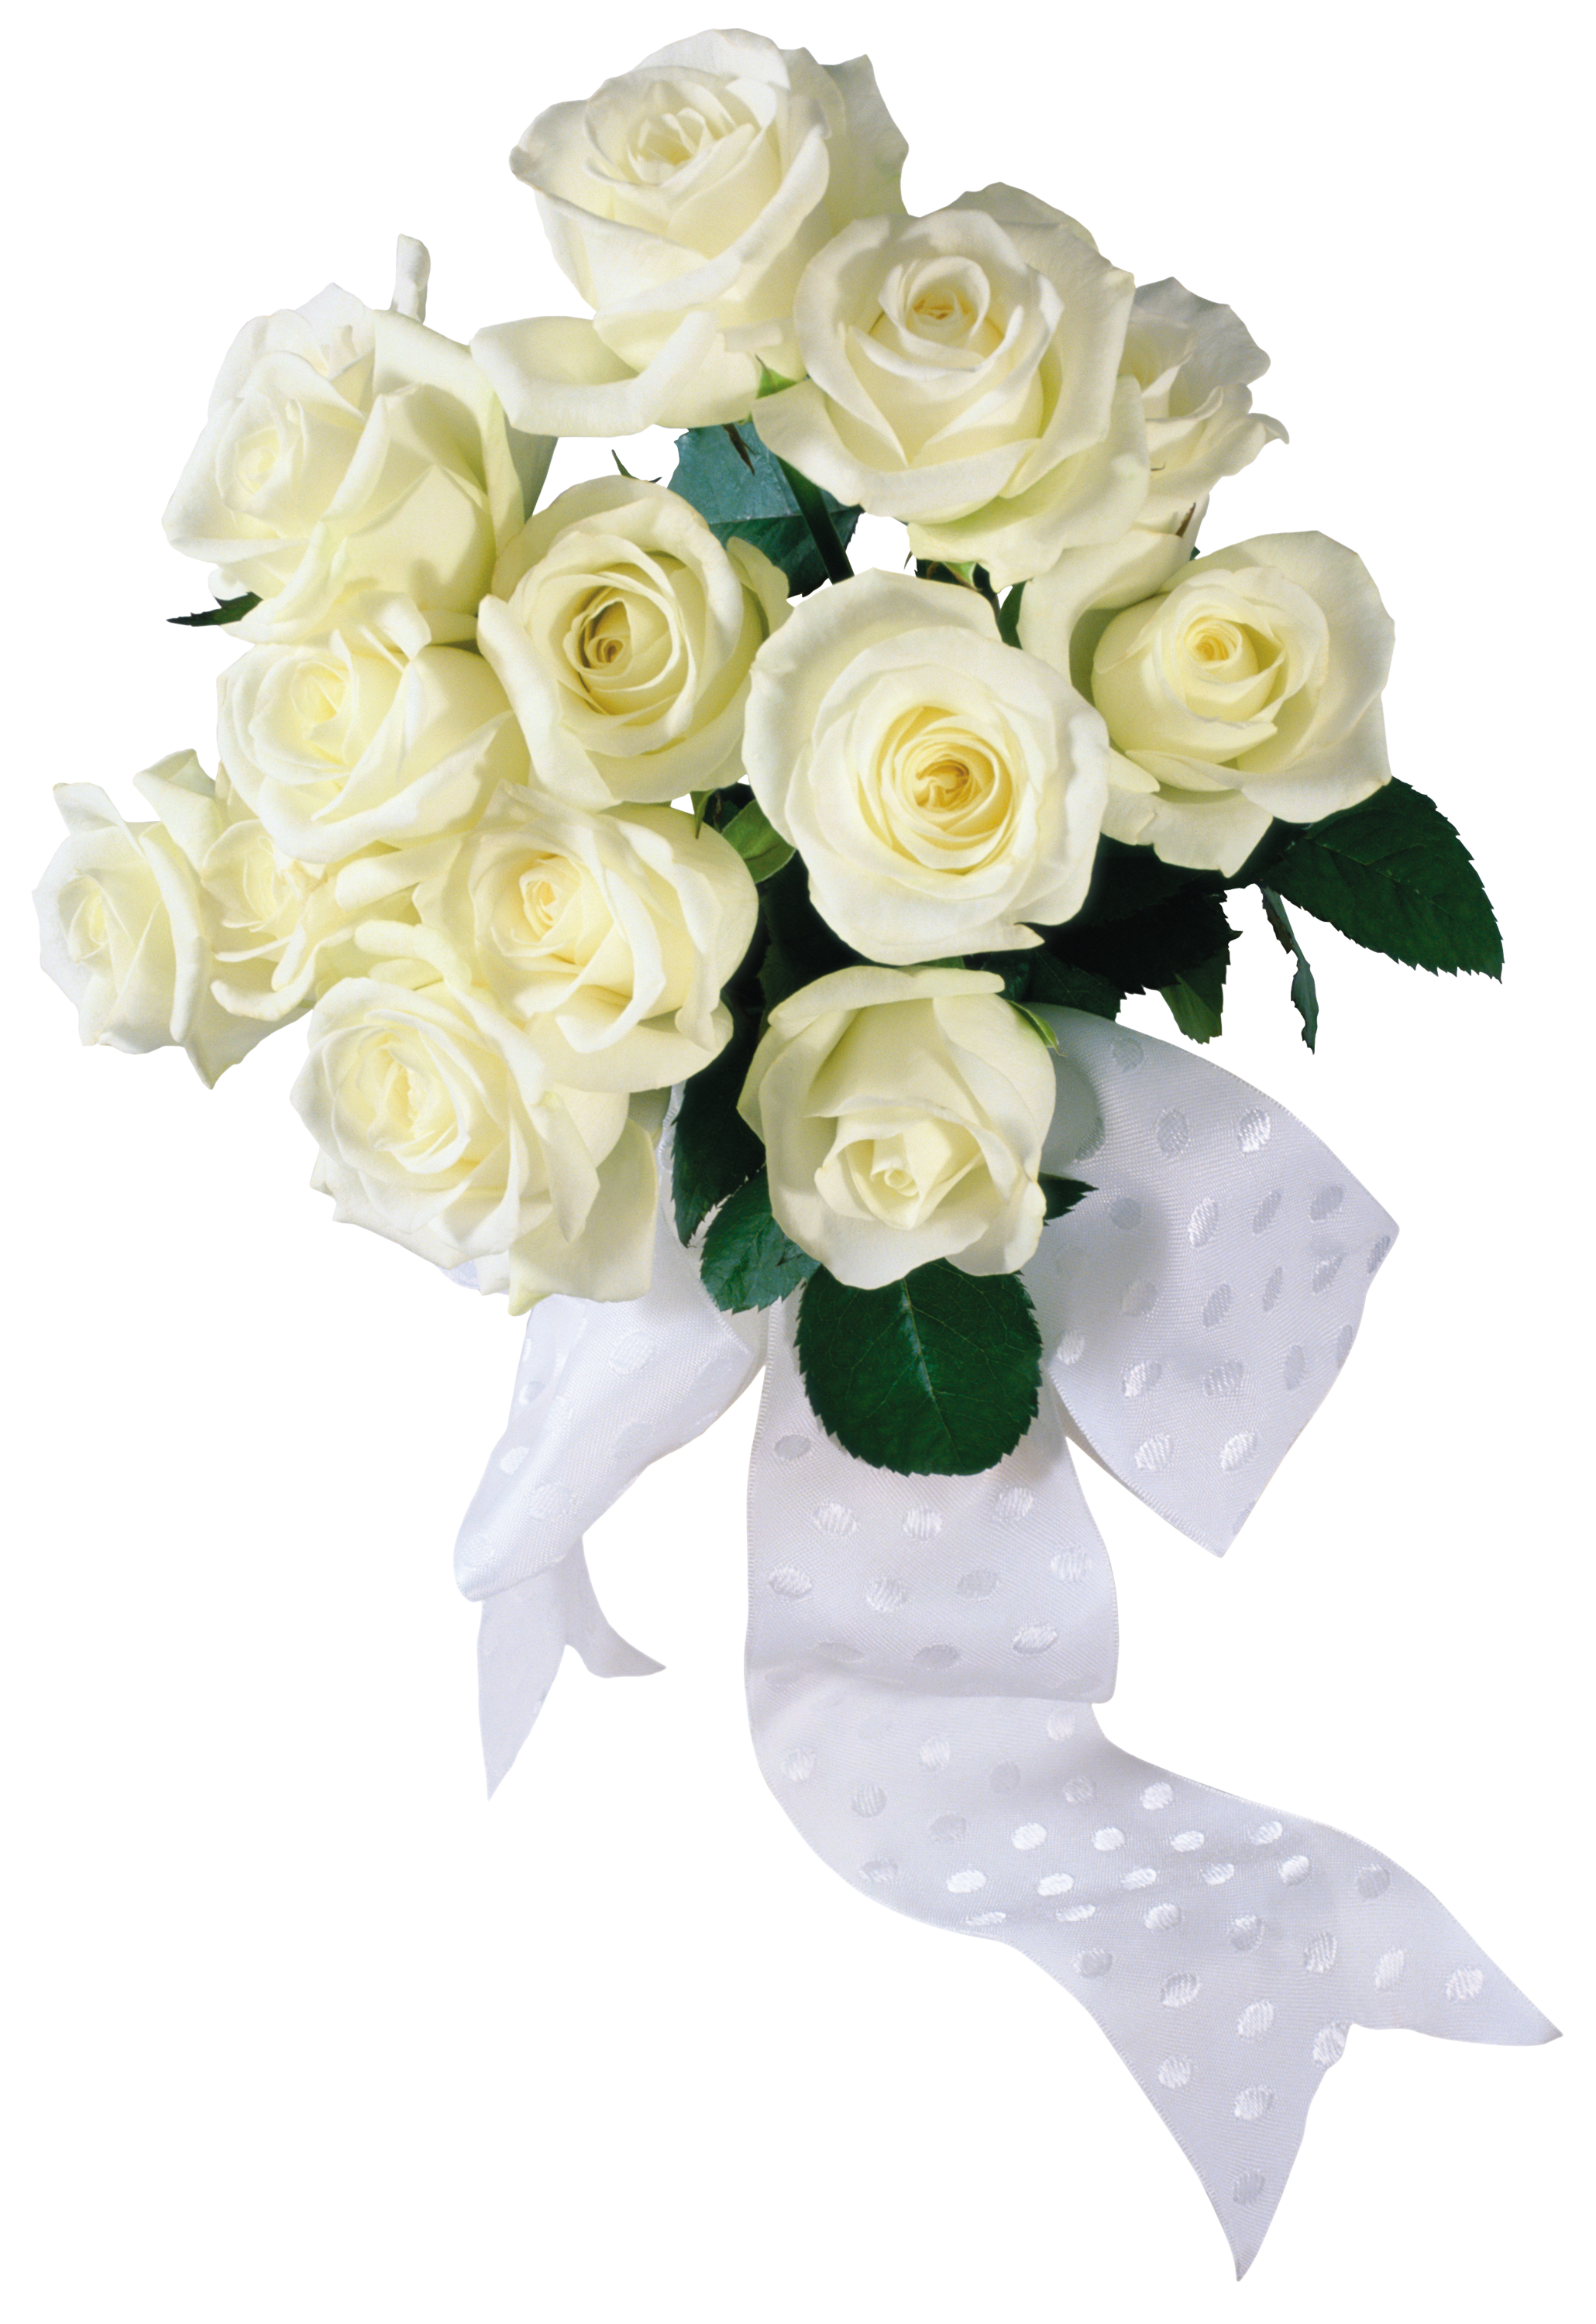 White roses PNG image